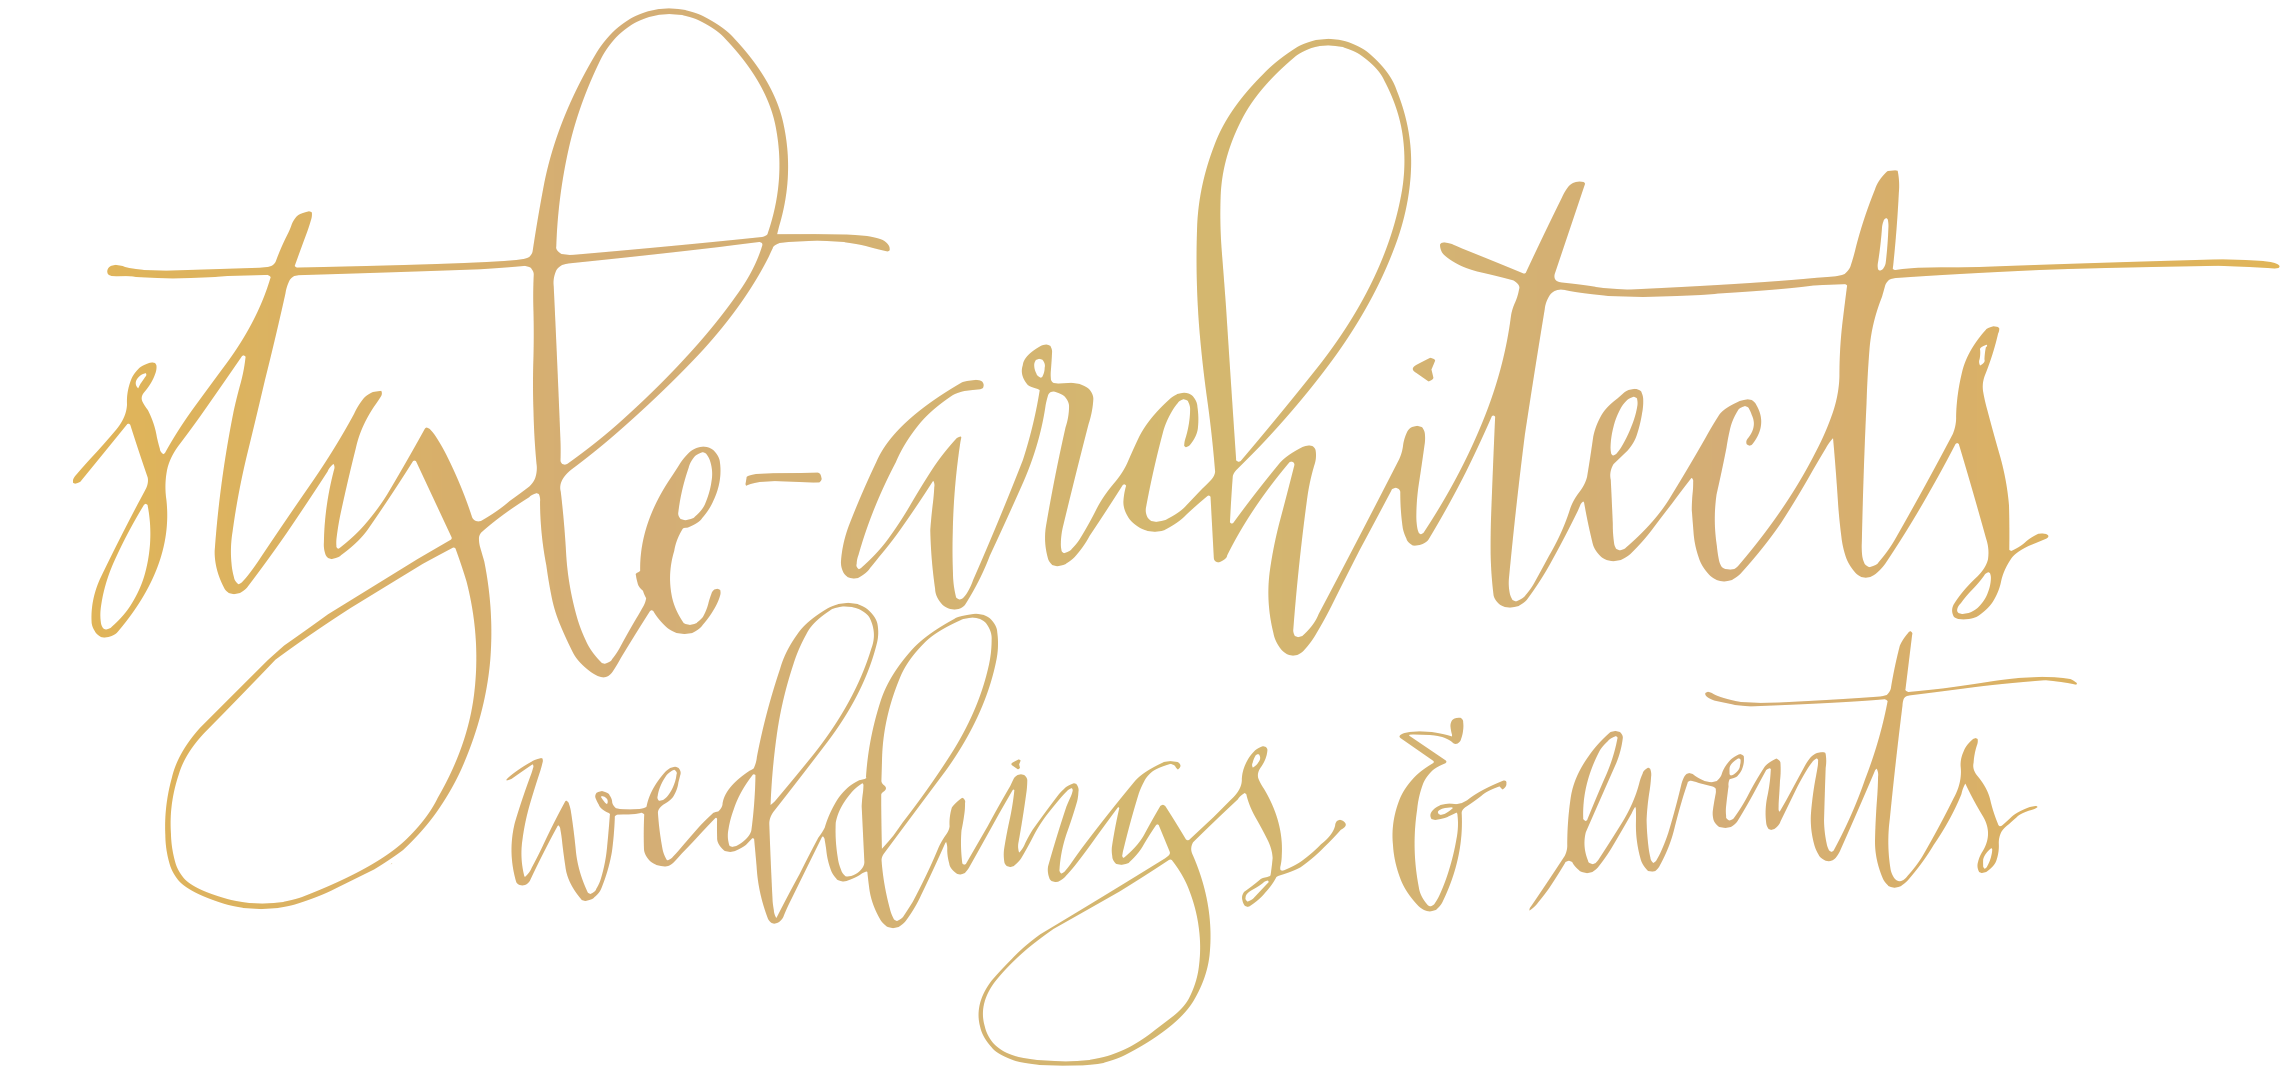 Style-Architects Weddings + Events